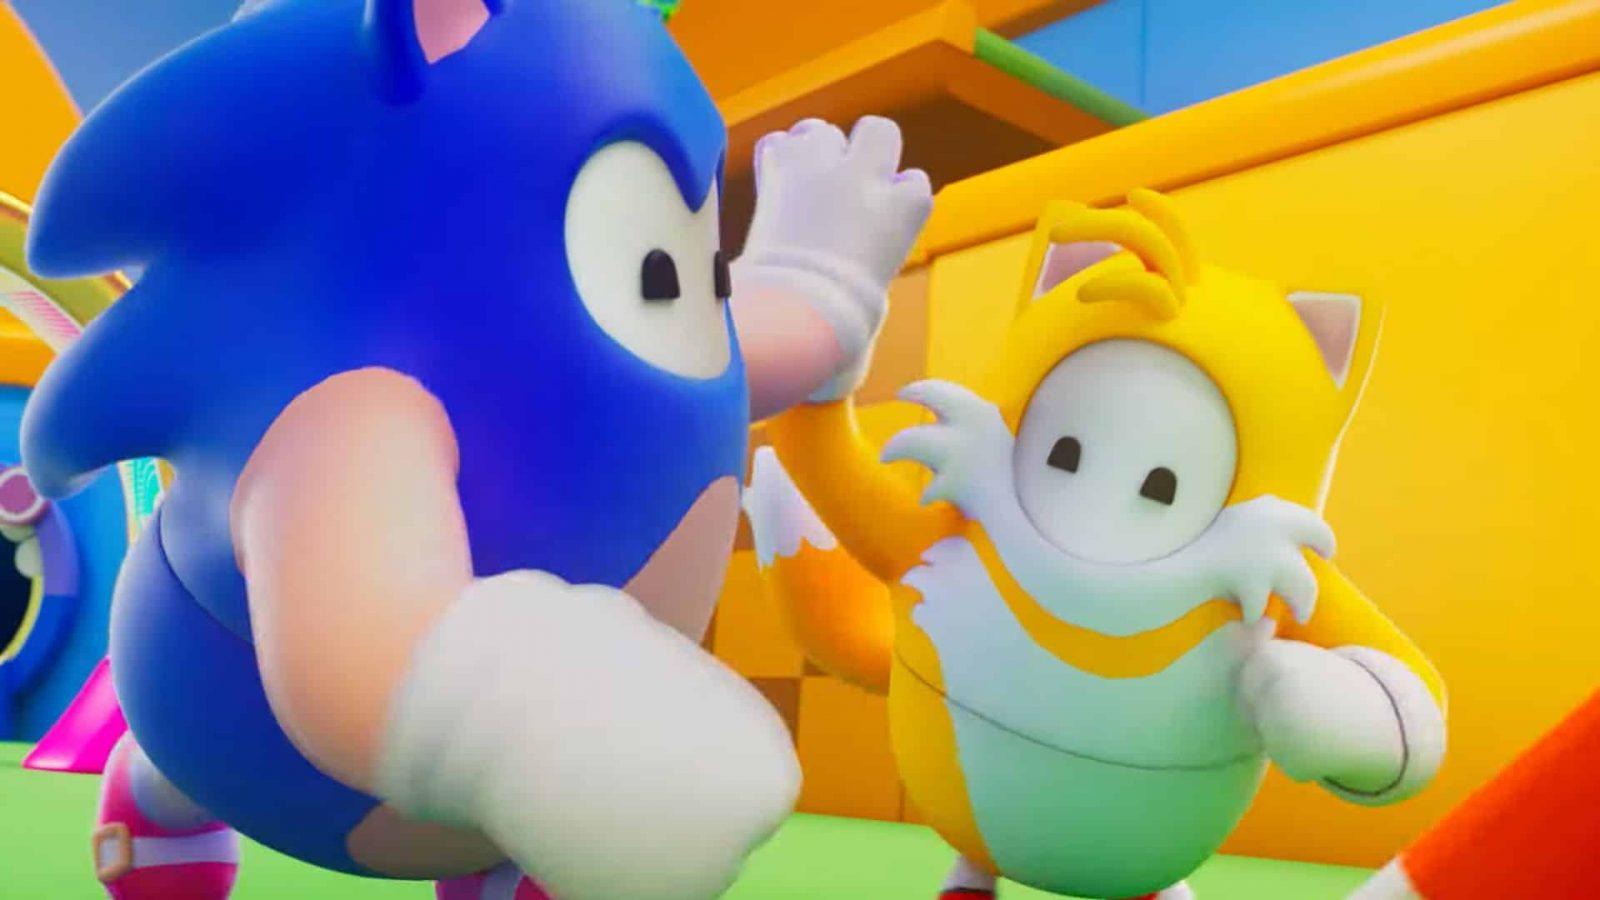 sonic and tails high-fiving in fall guys